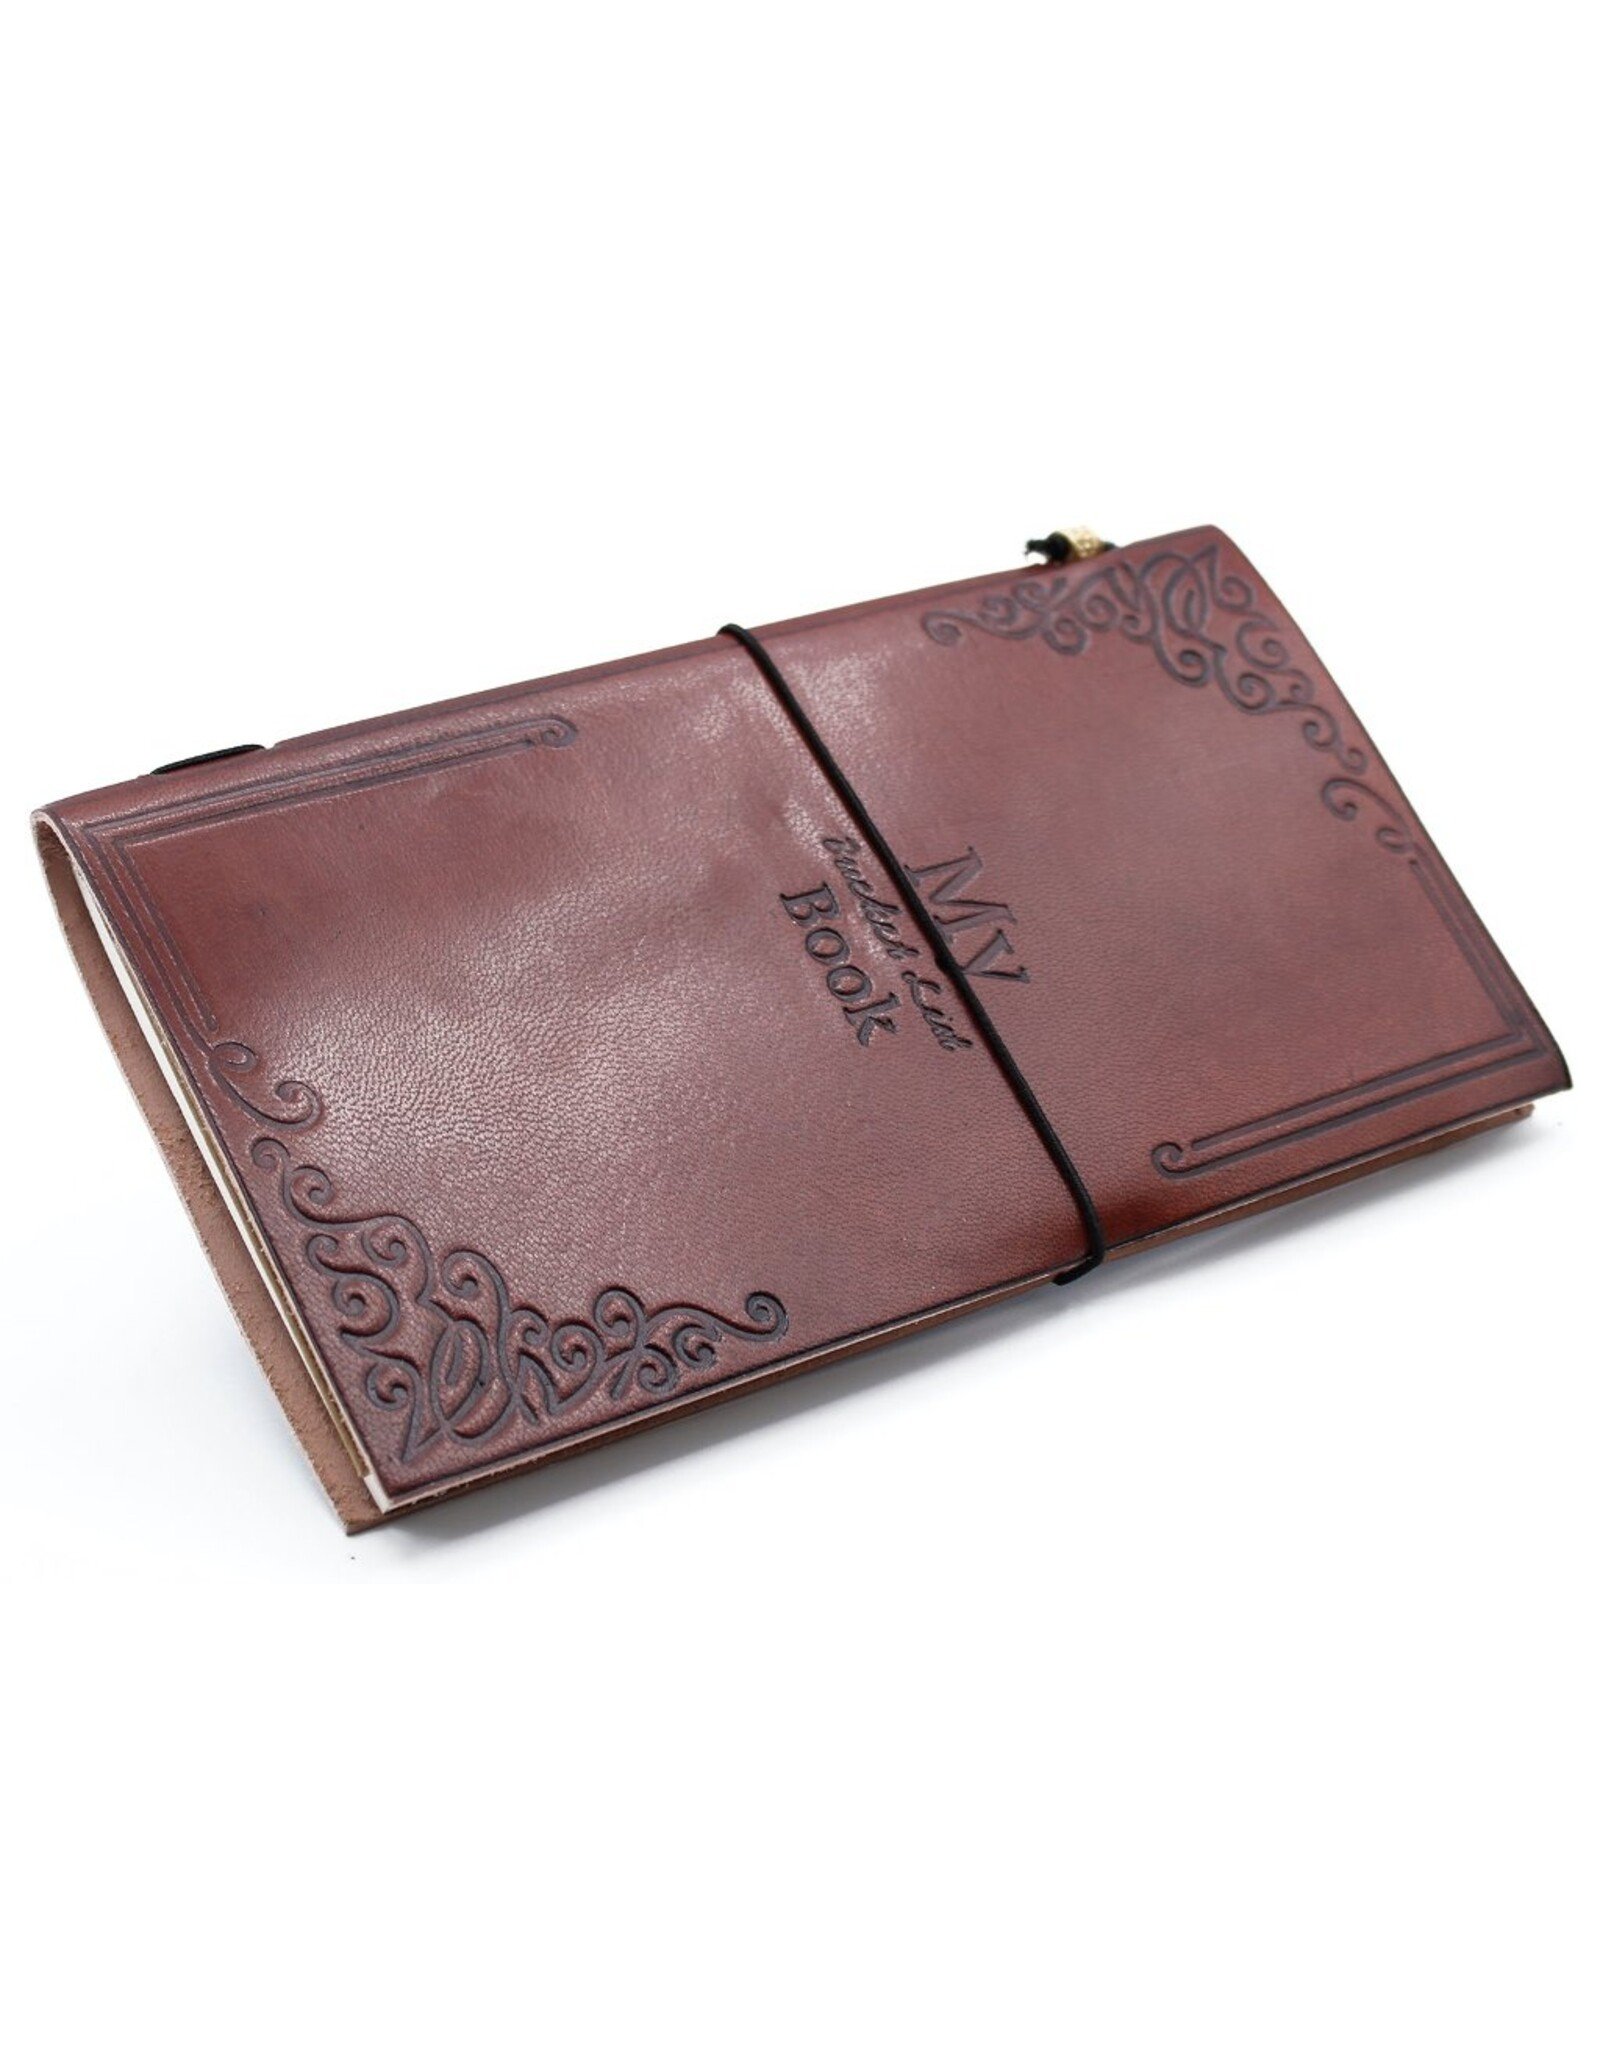 AWG Miscellaneous - Leather Journal 'My Bucket List Book'  22x12cm